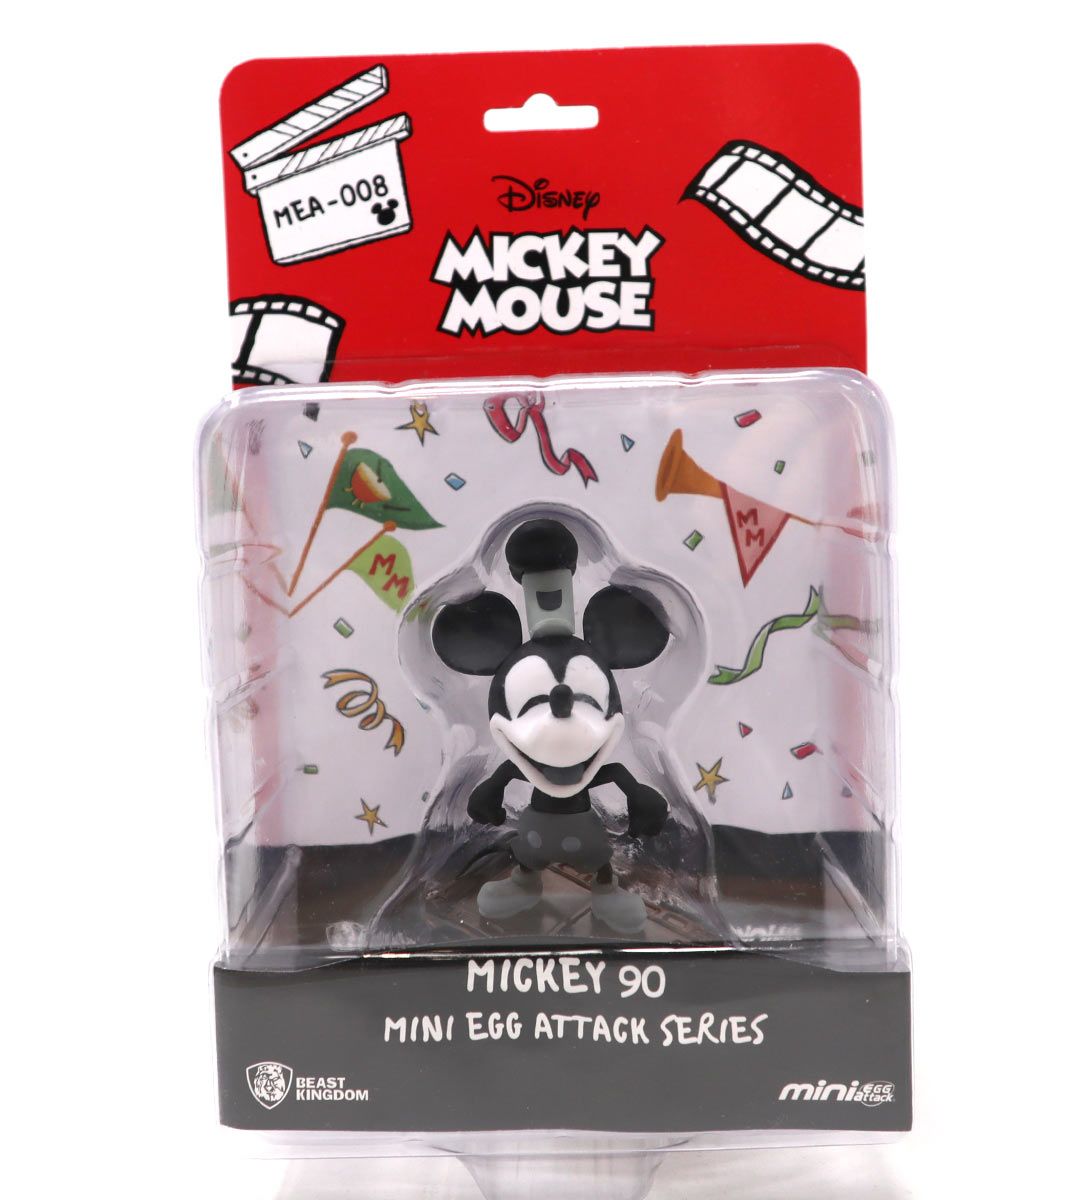 Mini Egg Attack Series - Steamboat Willie Mickey 90 (Mickey Mouse)